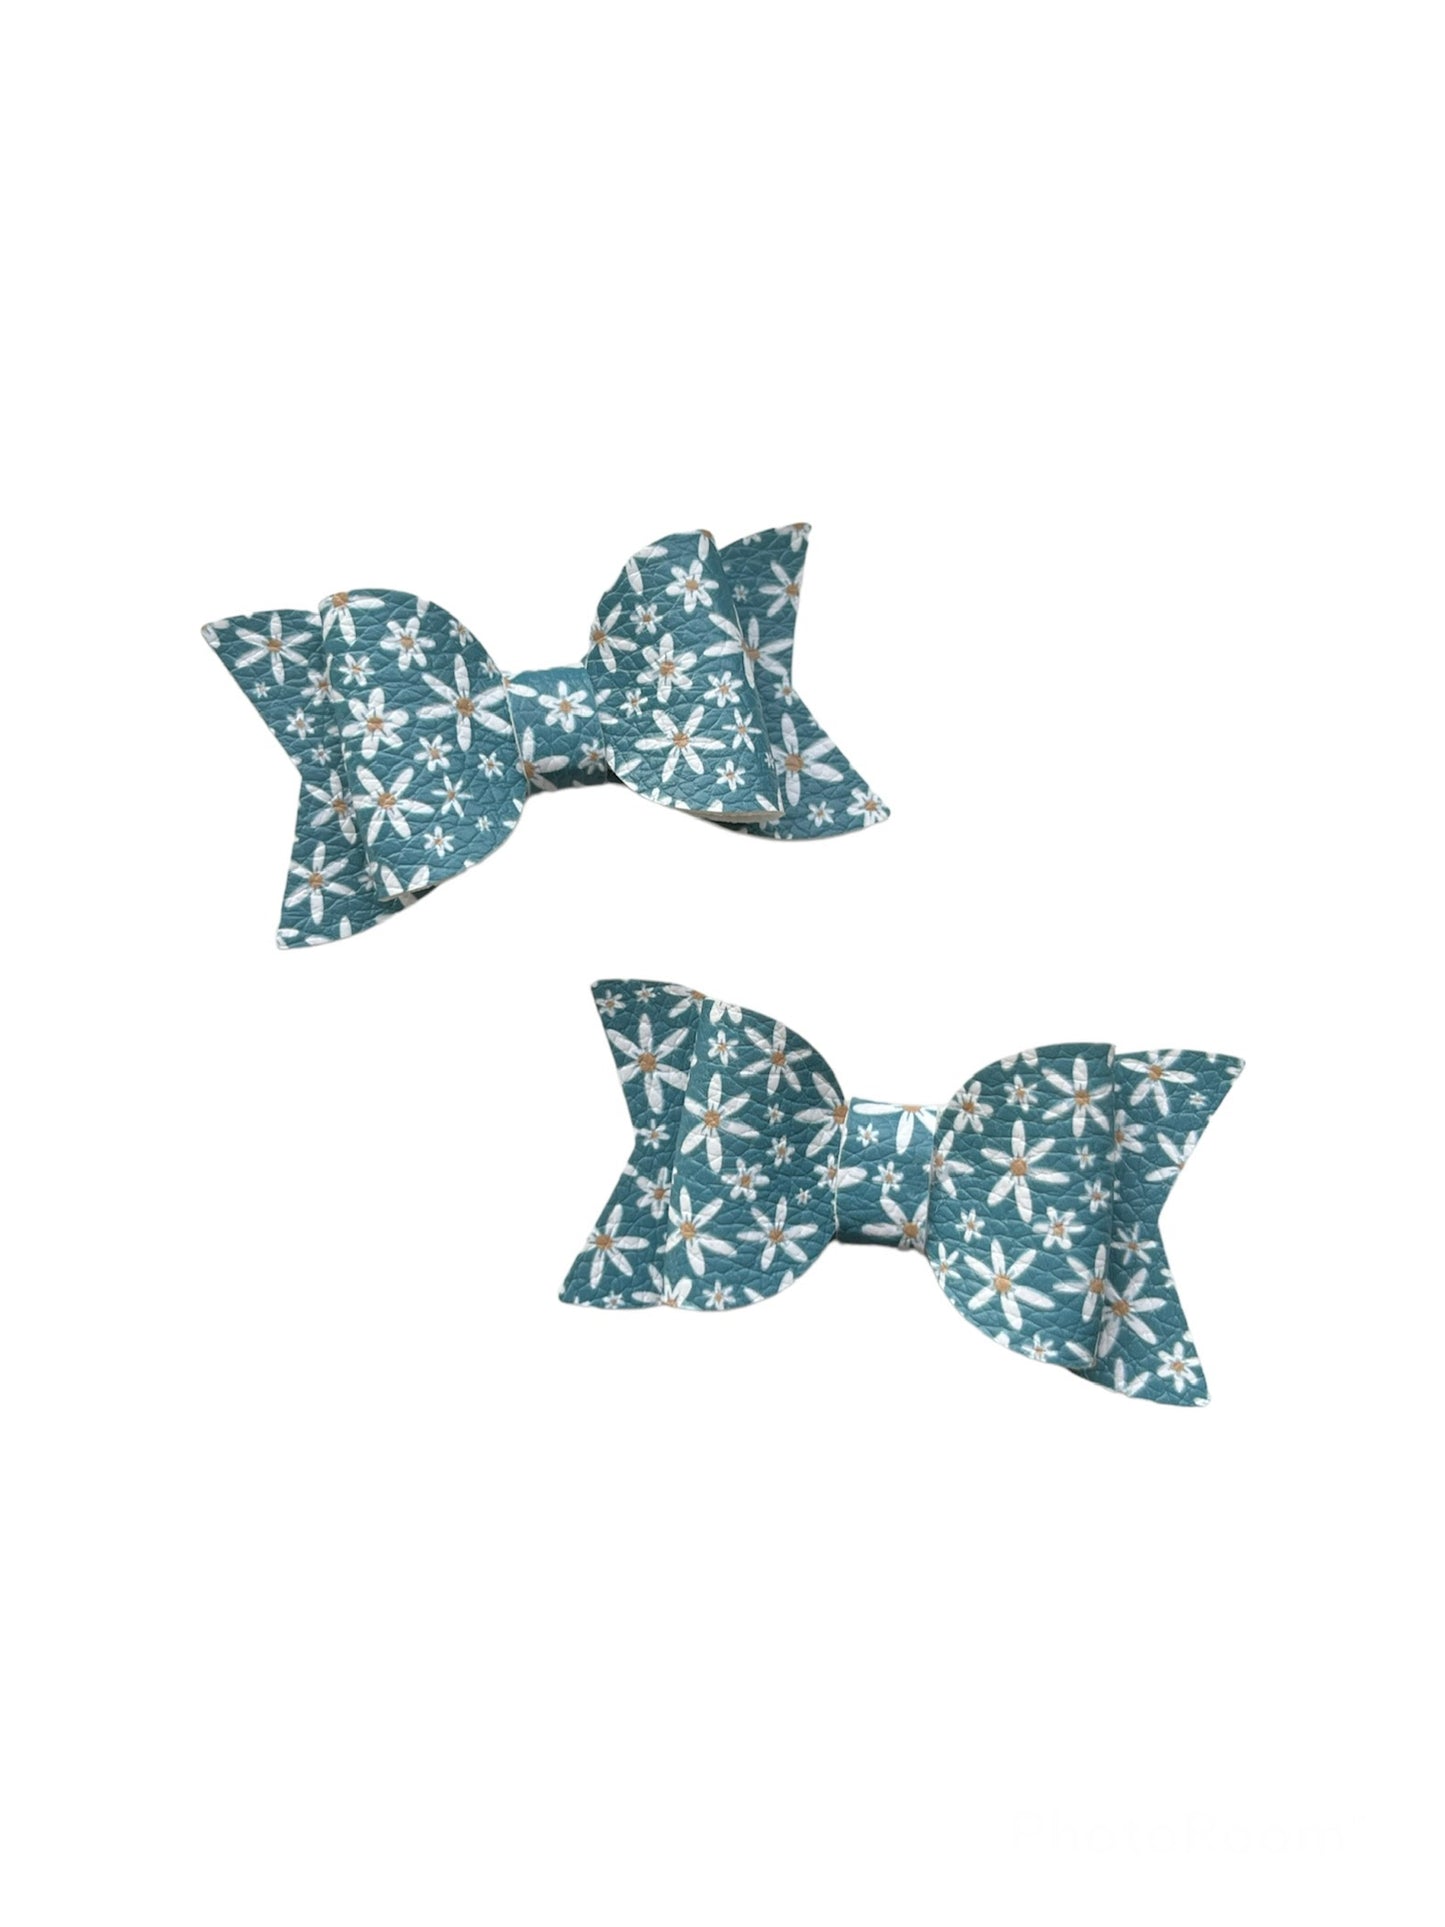 Dainty Blue Floral Pigtail Bows!